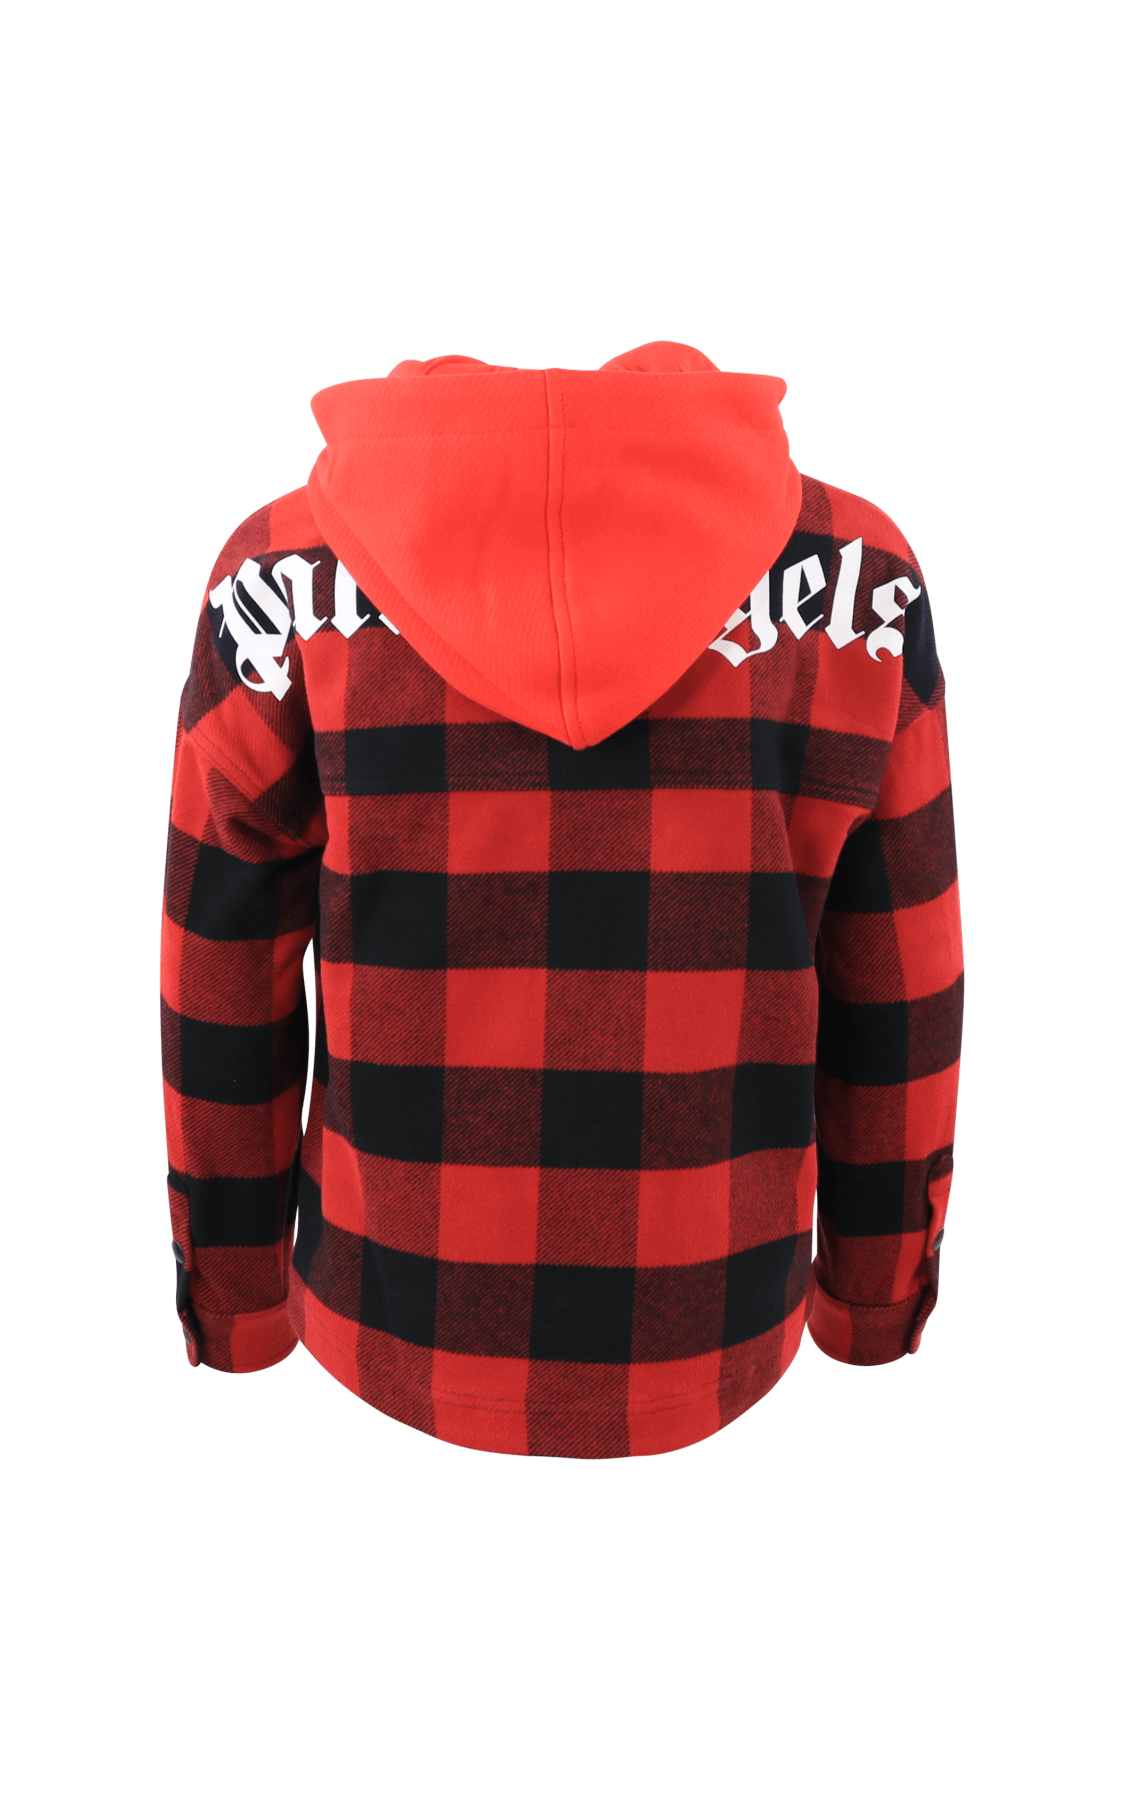 Kids Hoodie Logo about Shirt Red White